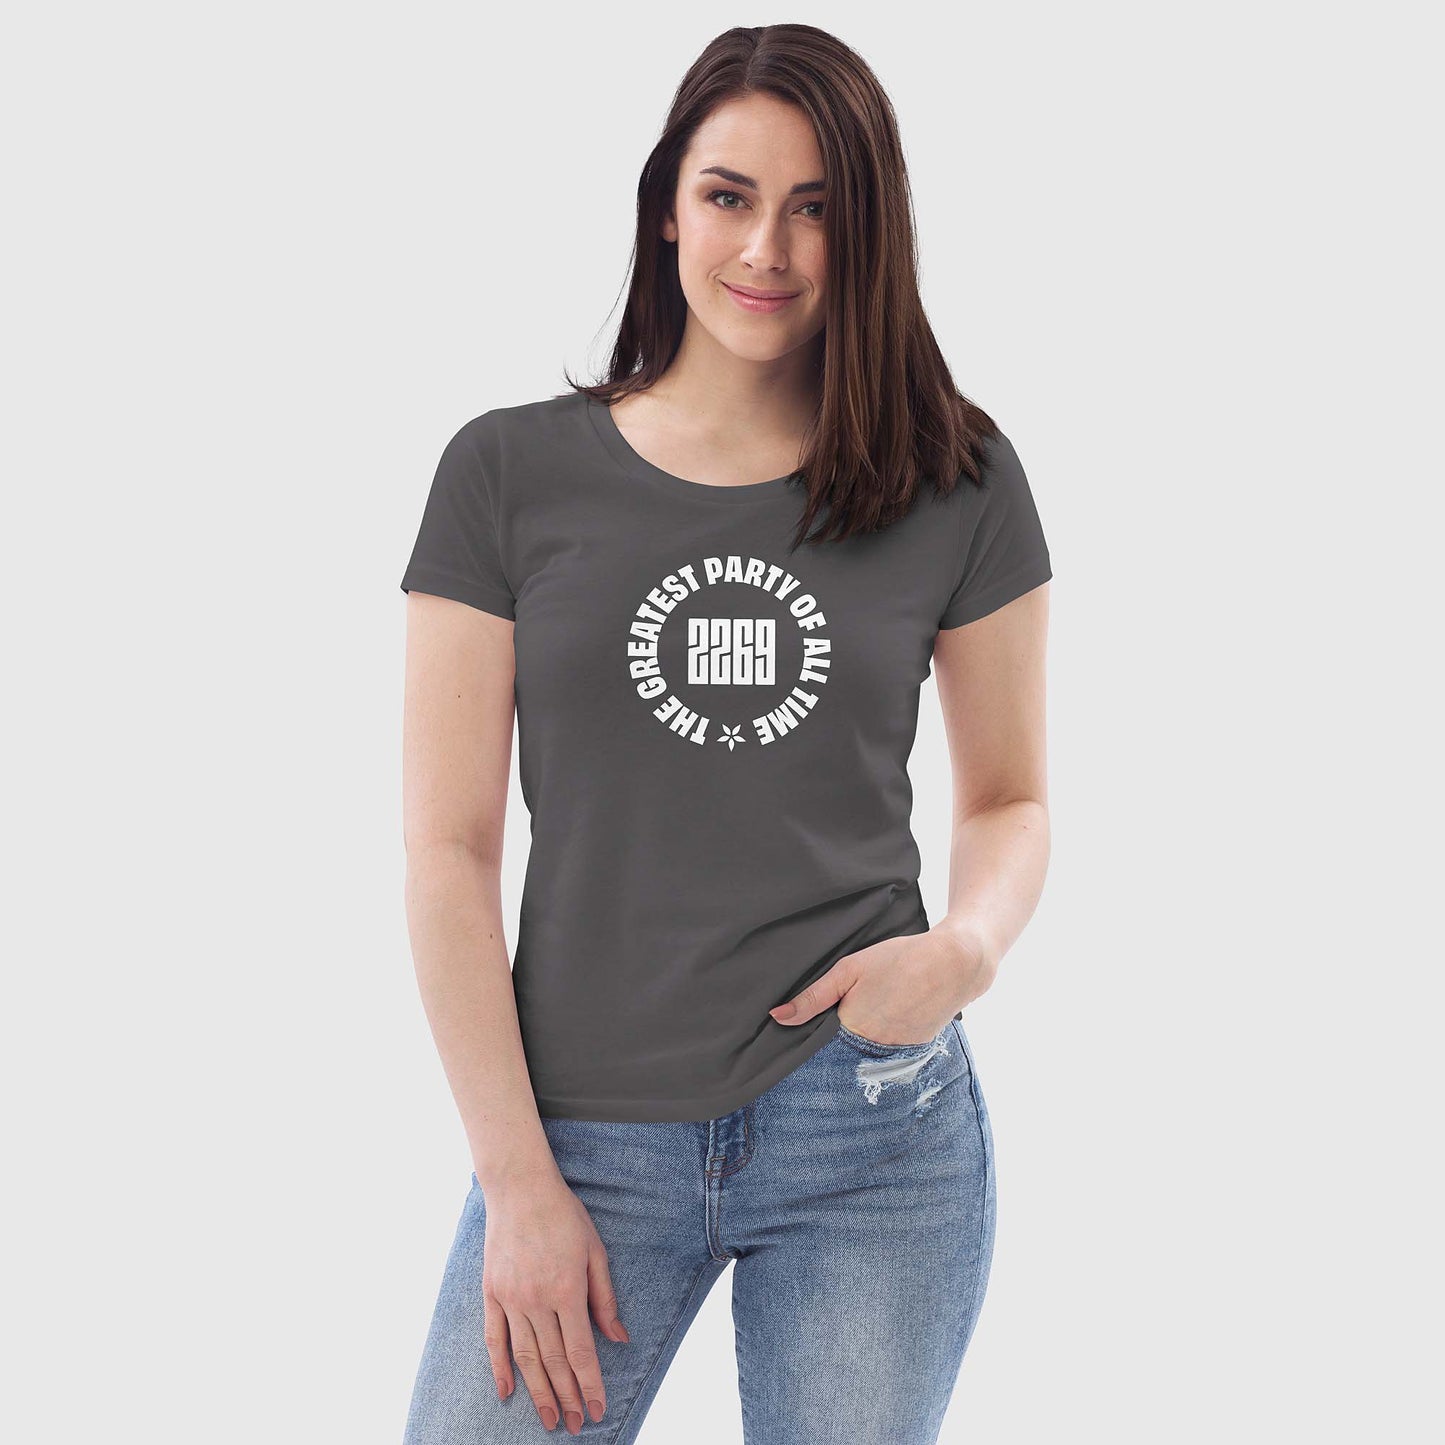 Women's anthracite fitted organic cotton t-shirt with English 2269 party circle